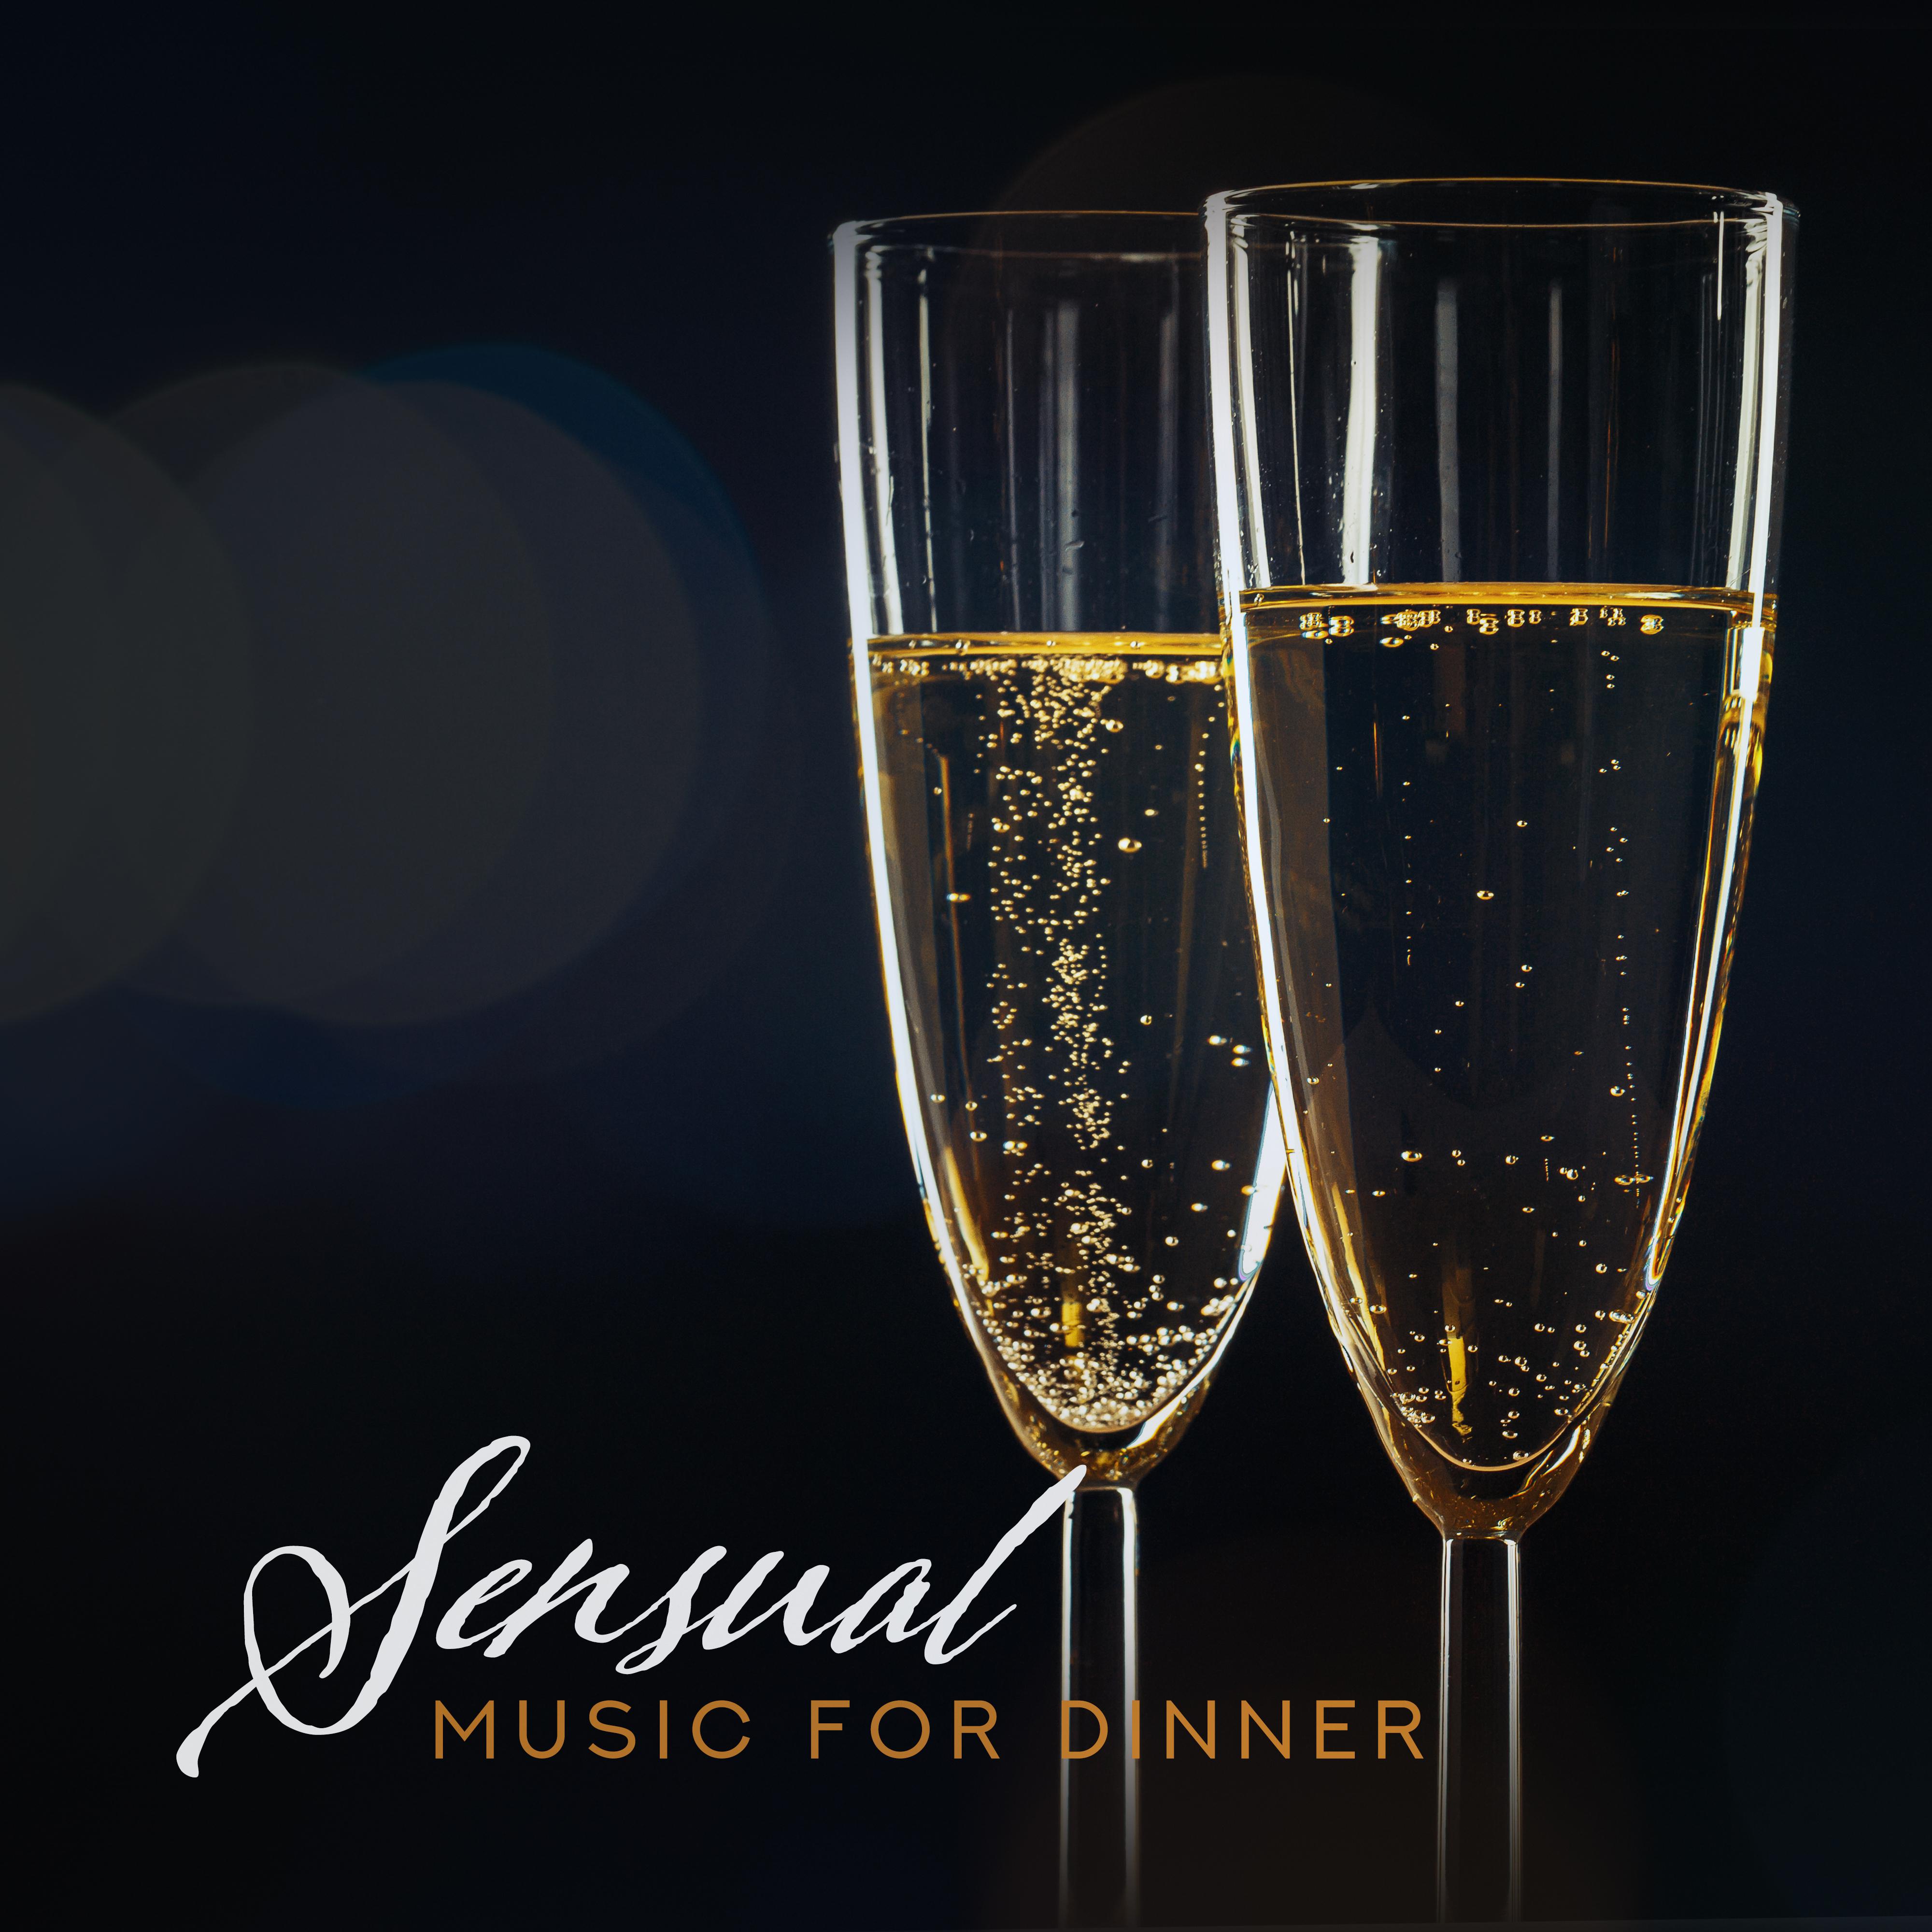 Sensual Music for Dinner: Jazz Relaxation, Night Music, 15 Dinner Songs for Lovers, Instrumental Jazz Music Ambient